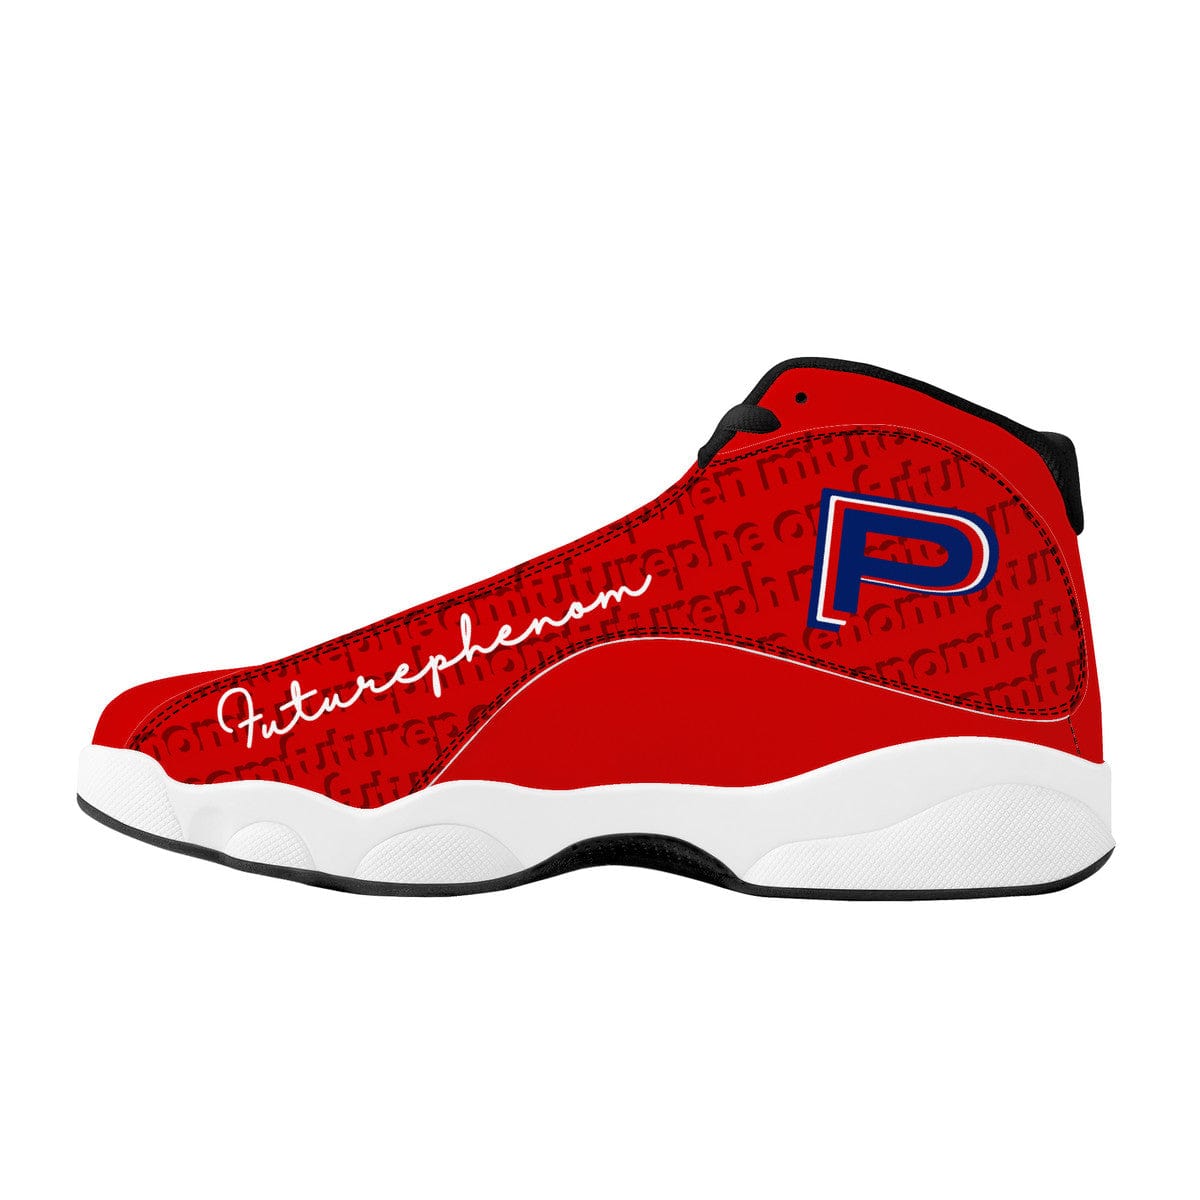 basketball shoes Crossover phenomenon shoes